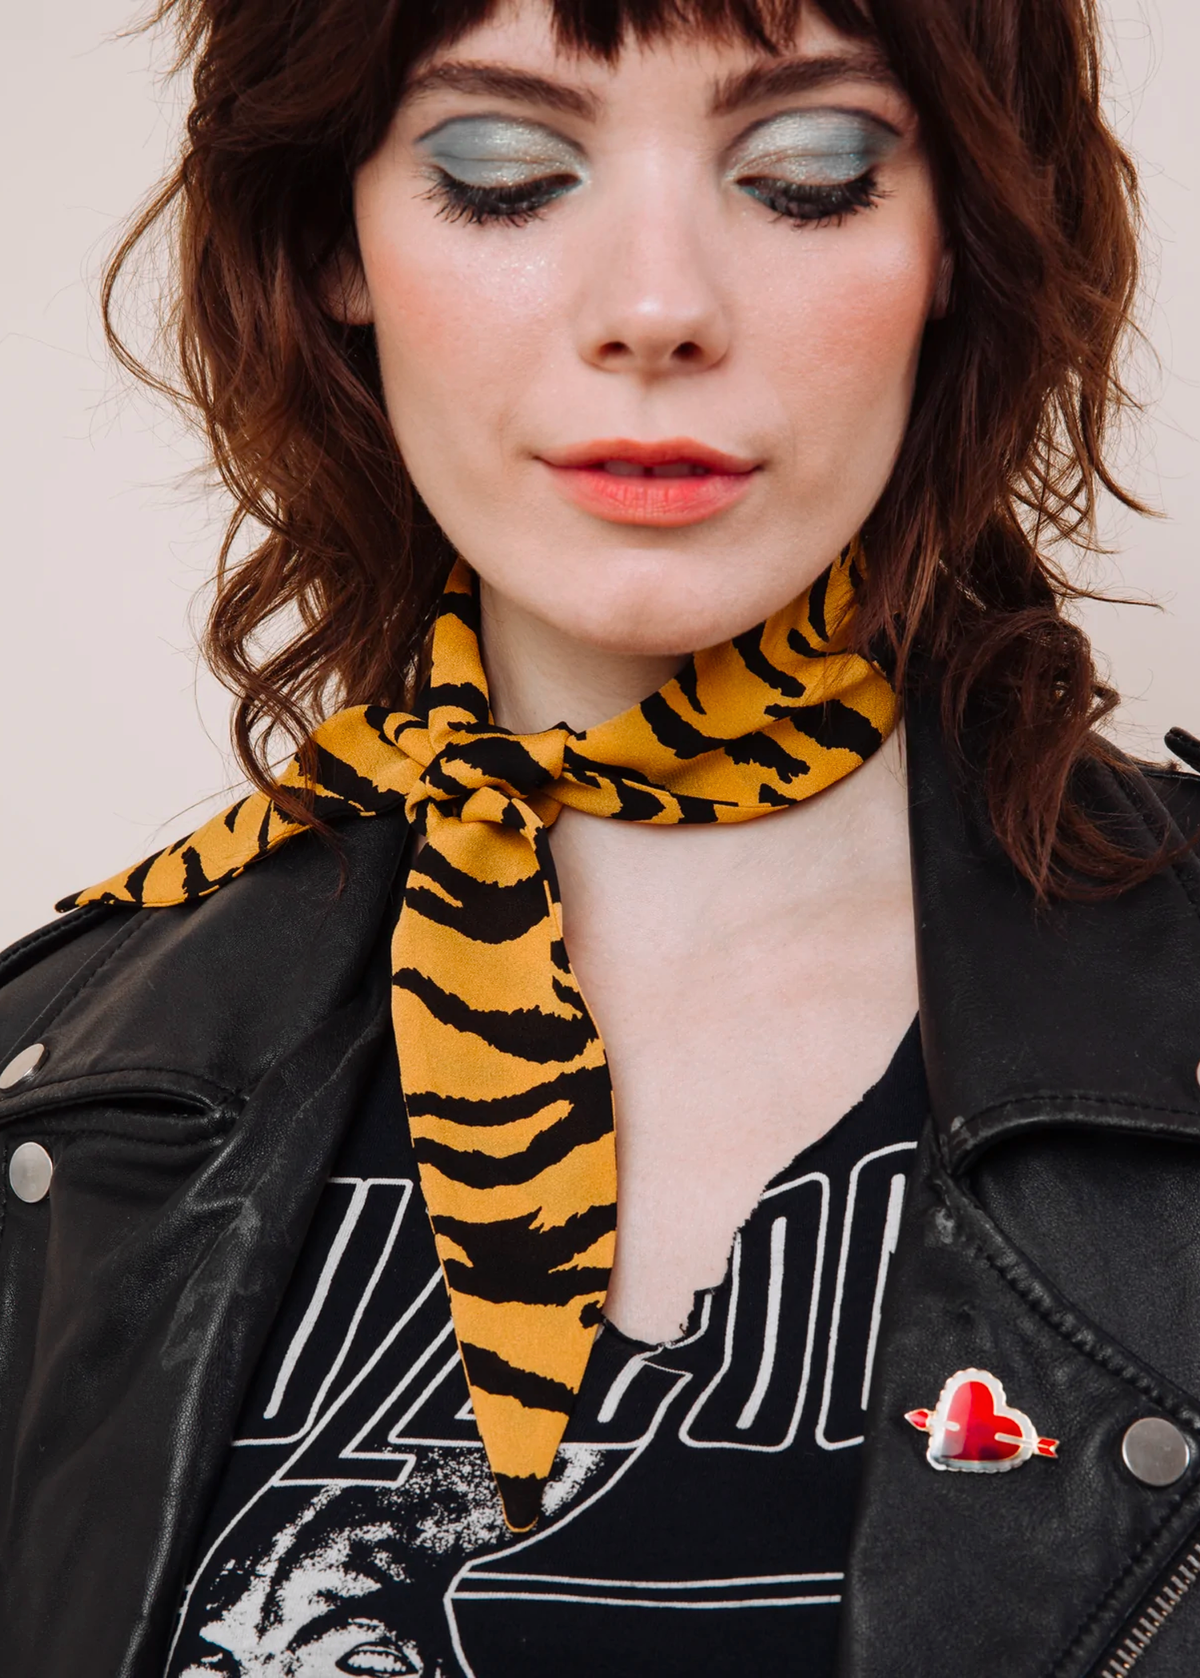 Orange Mustard and Black Tiger Print Silk Scarf Neck Tie by I'm With the Band, handmade in california